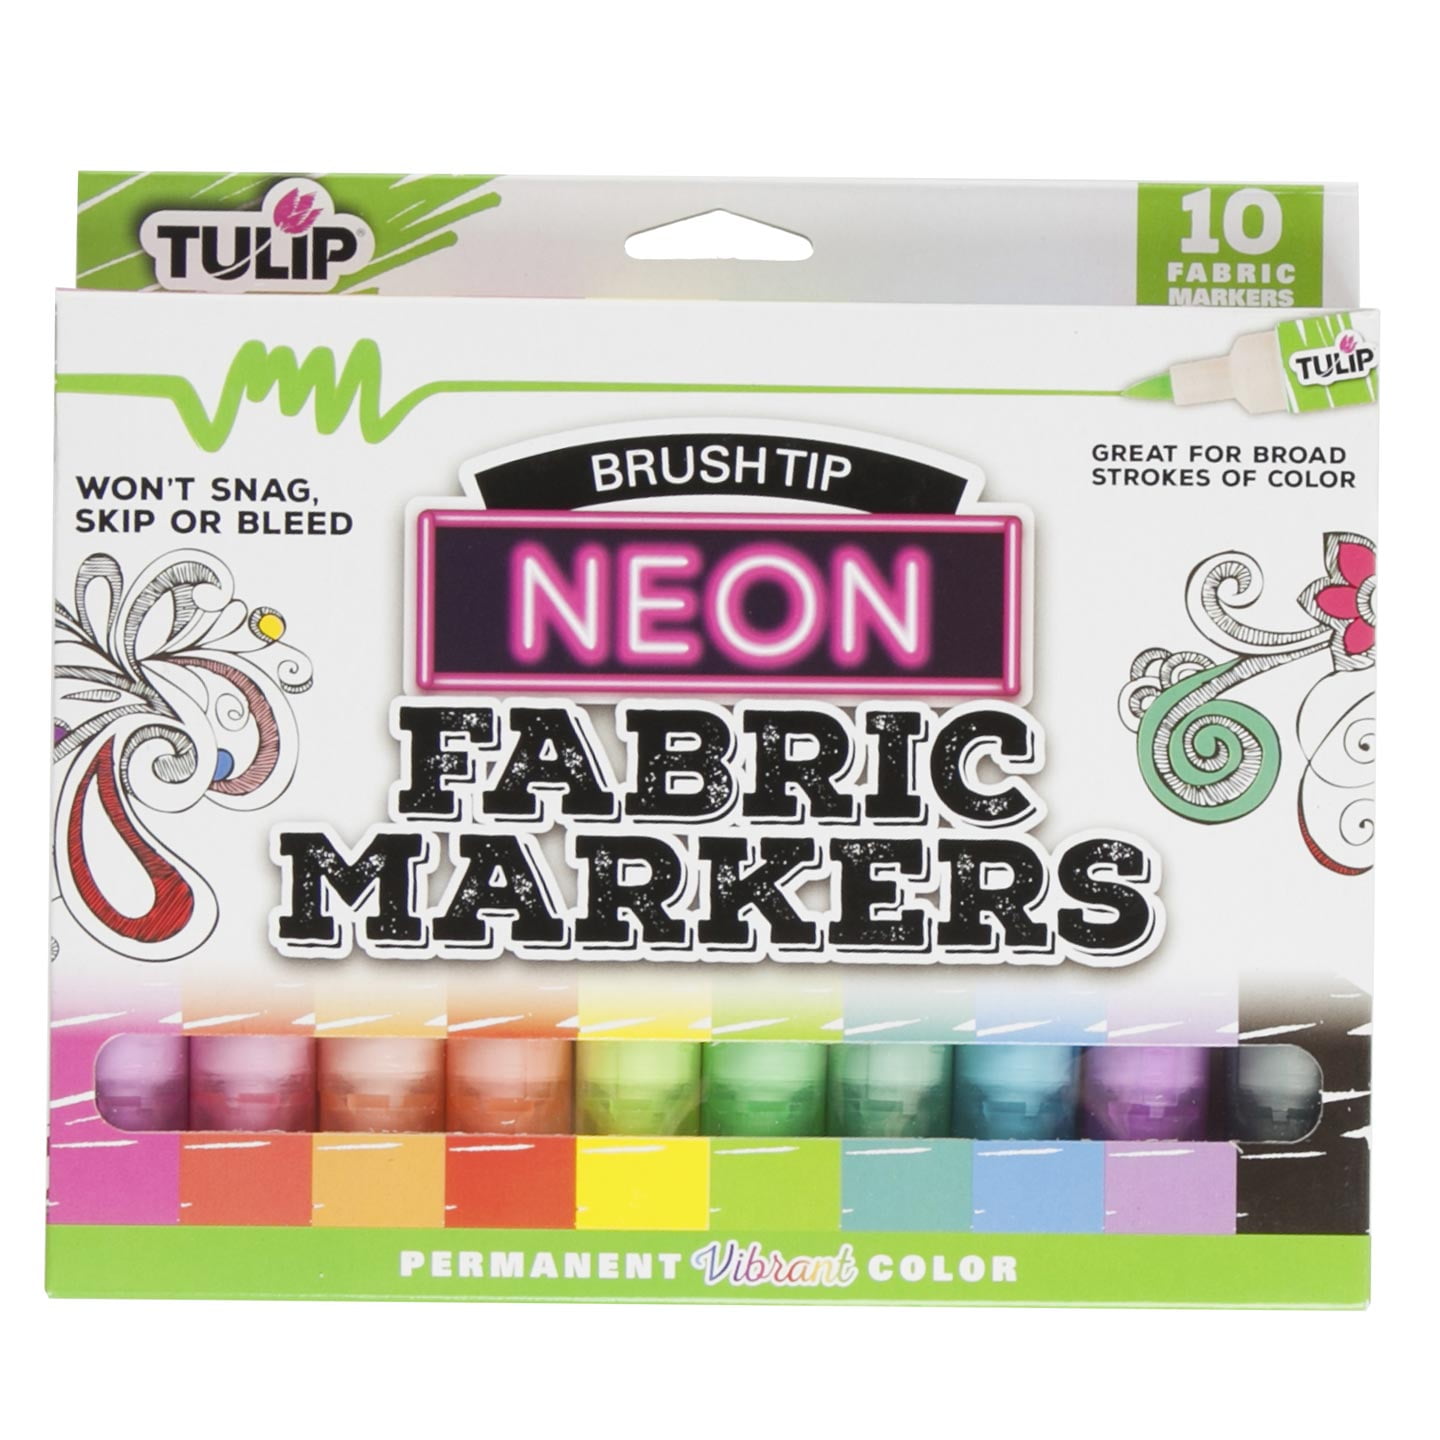 Tulip Fabric Markers Brush Tip 10 Pack Neon, Permanent, Great for Broad Strokes